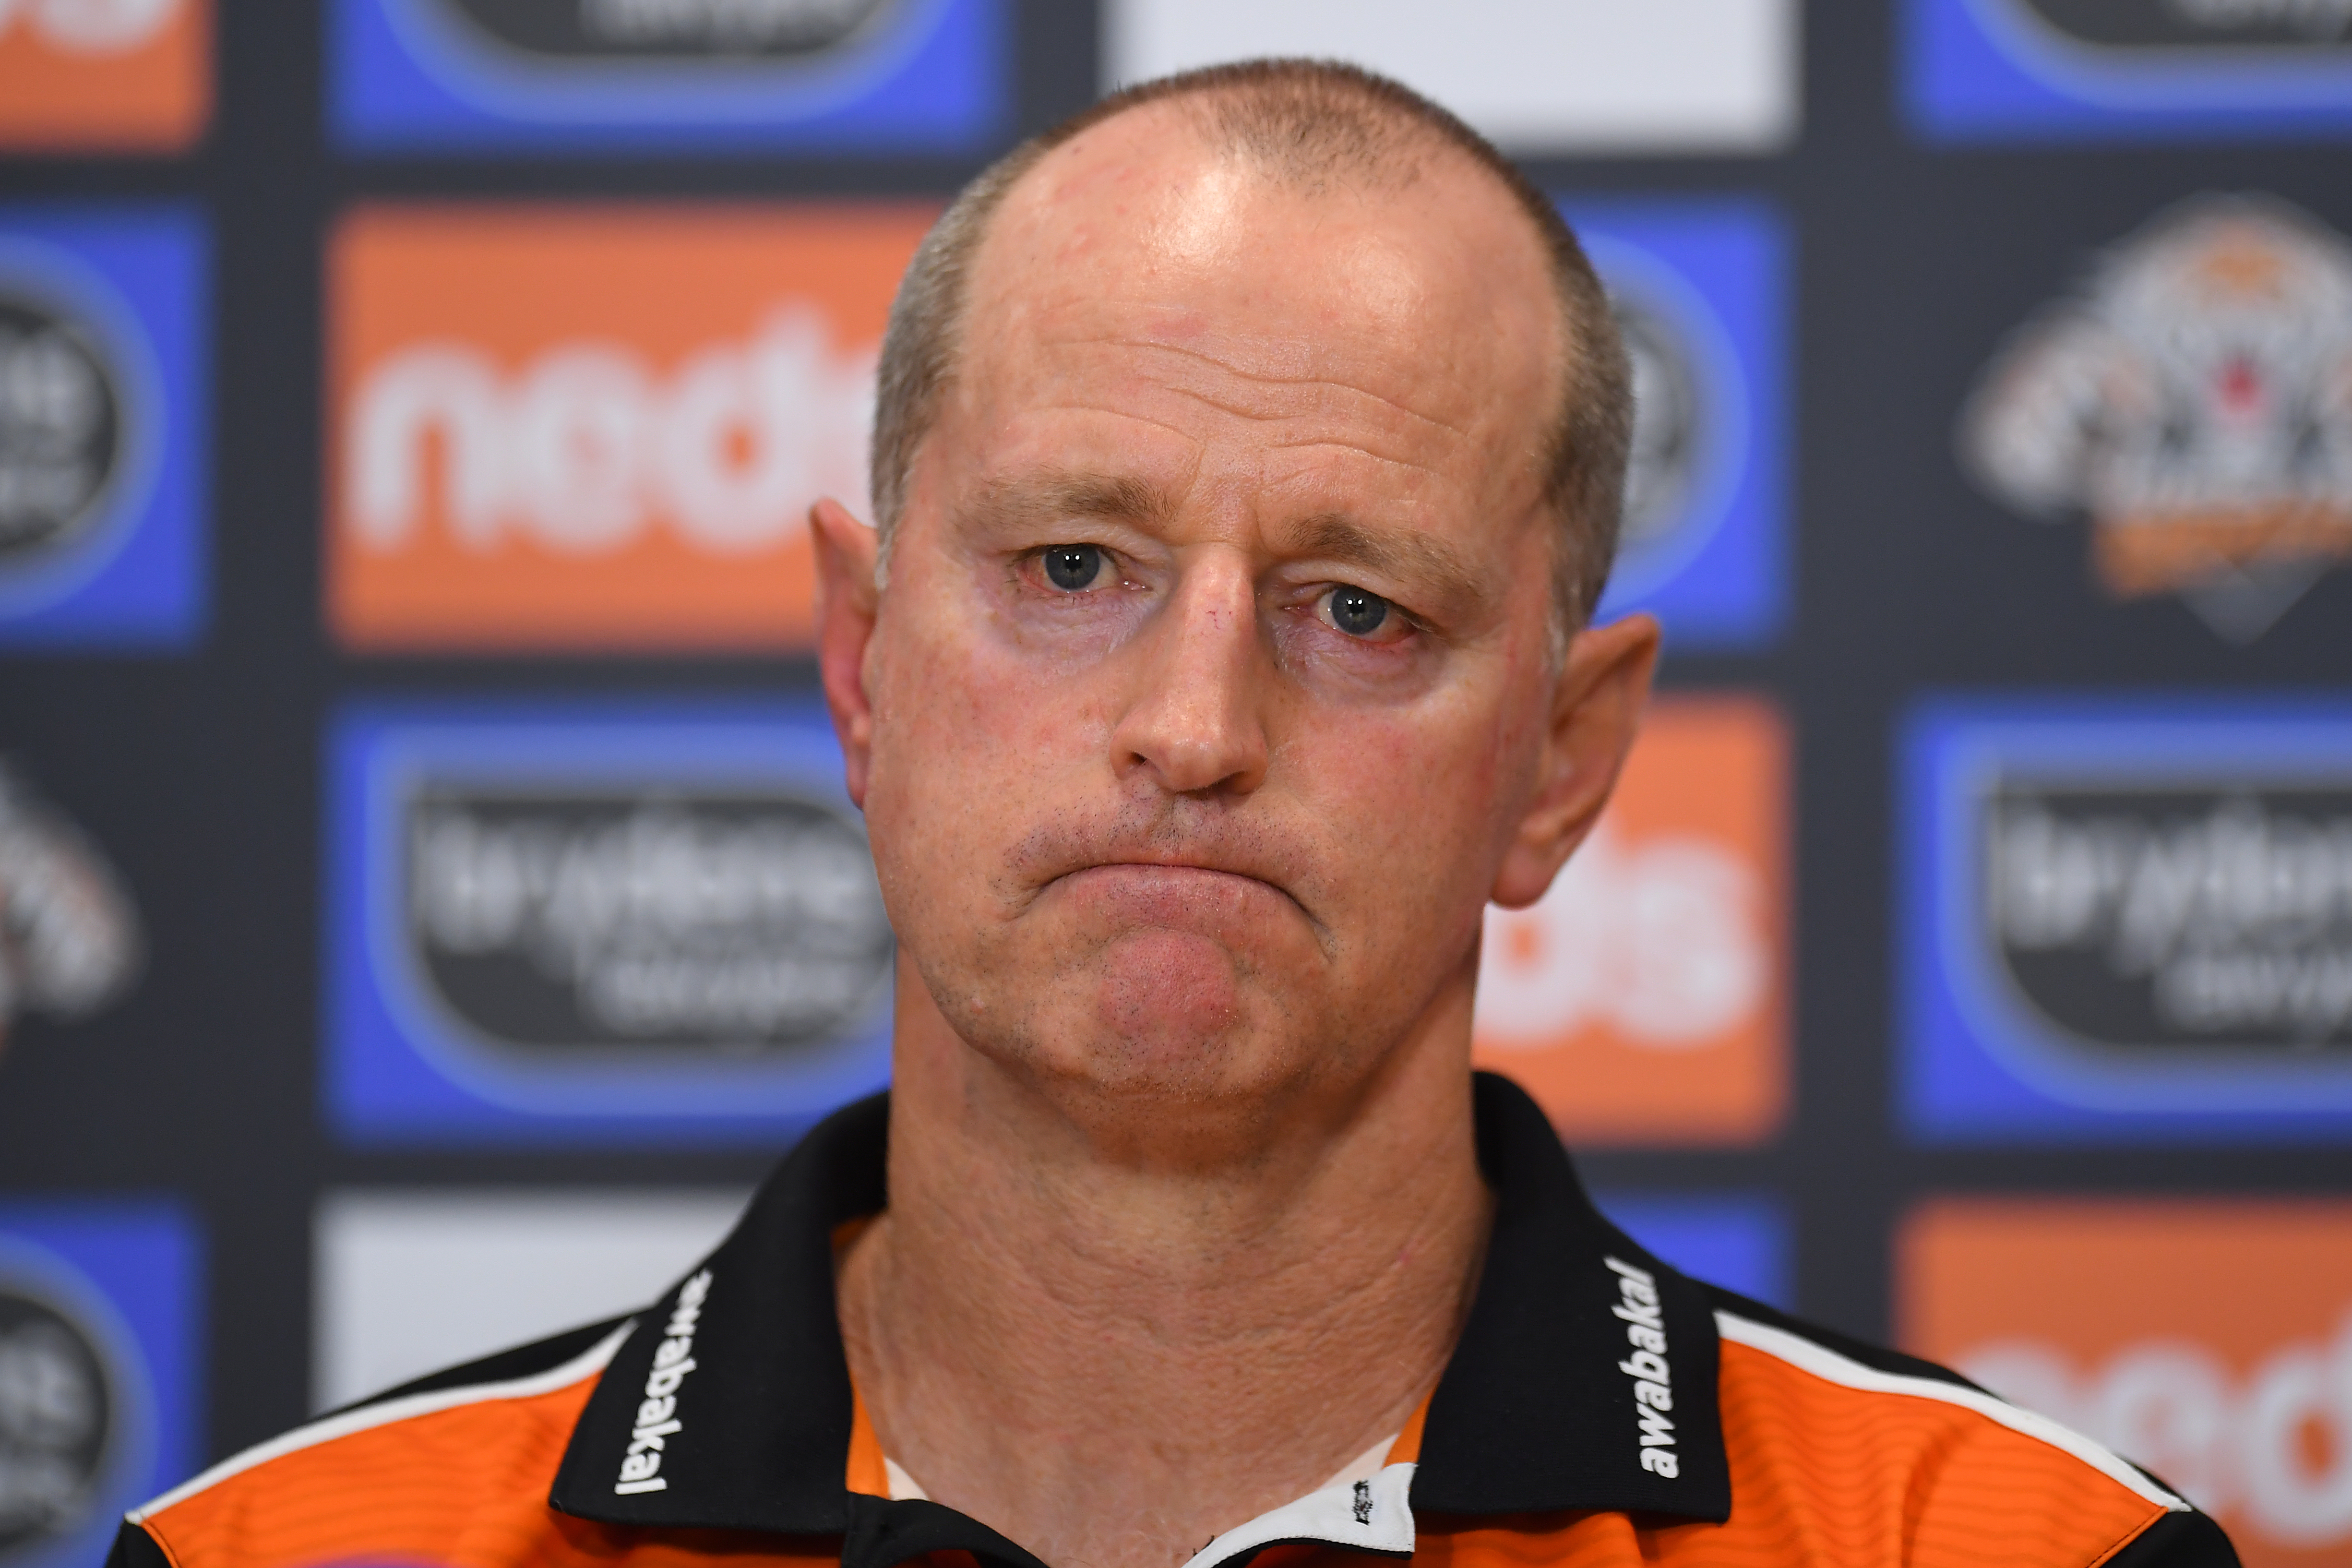 NRL news 2022, Michael Maguire sacked as Wests Tigers coach